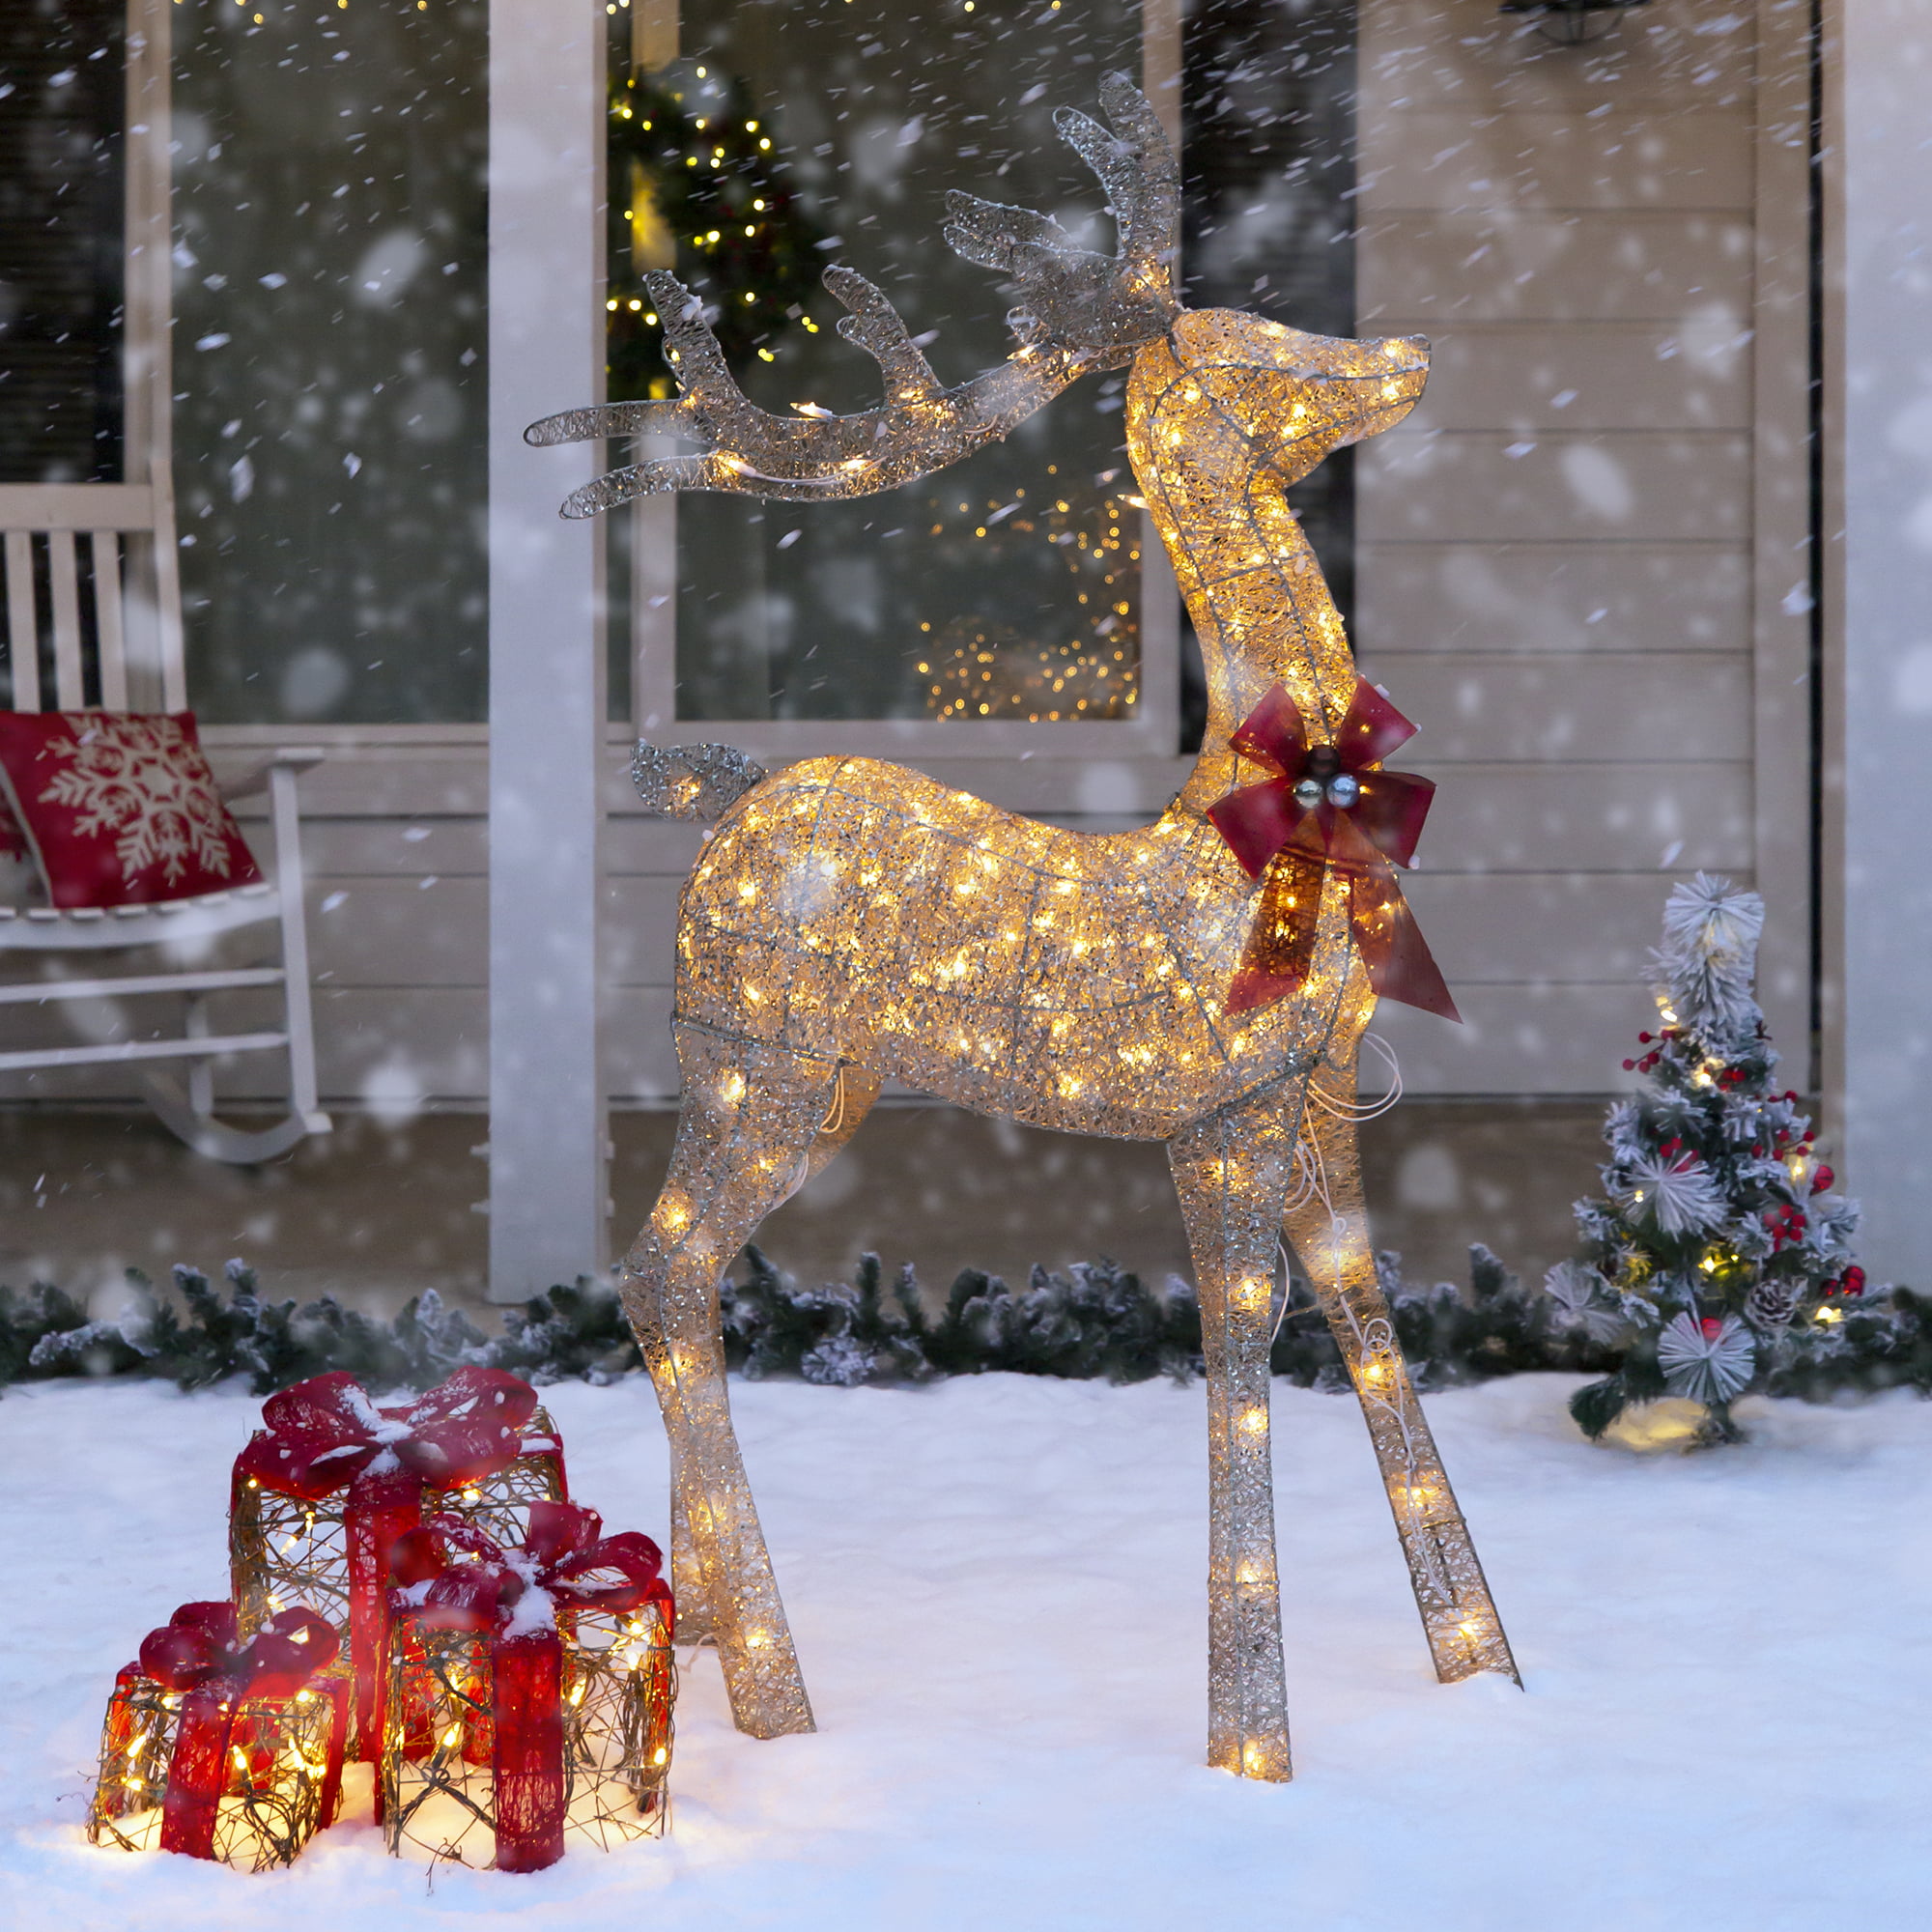 2020's Top Outdoor Holiday Decorating Trends Are Bigger, Bolder and  Brighter According to Christmas Decor